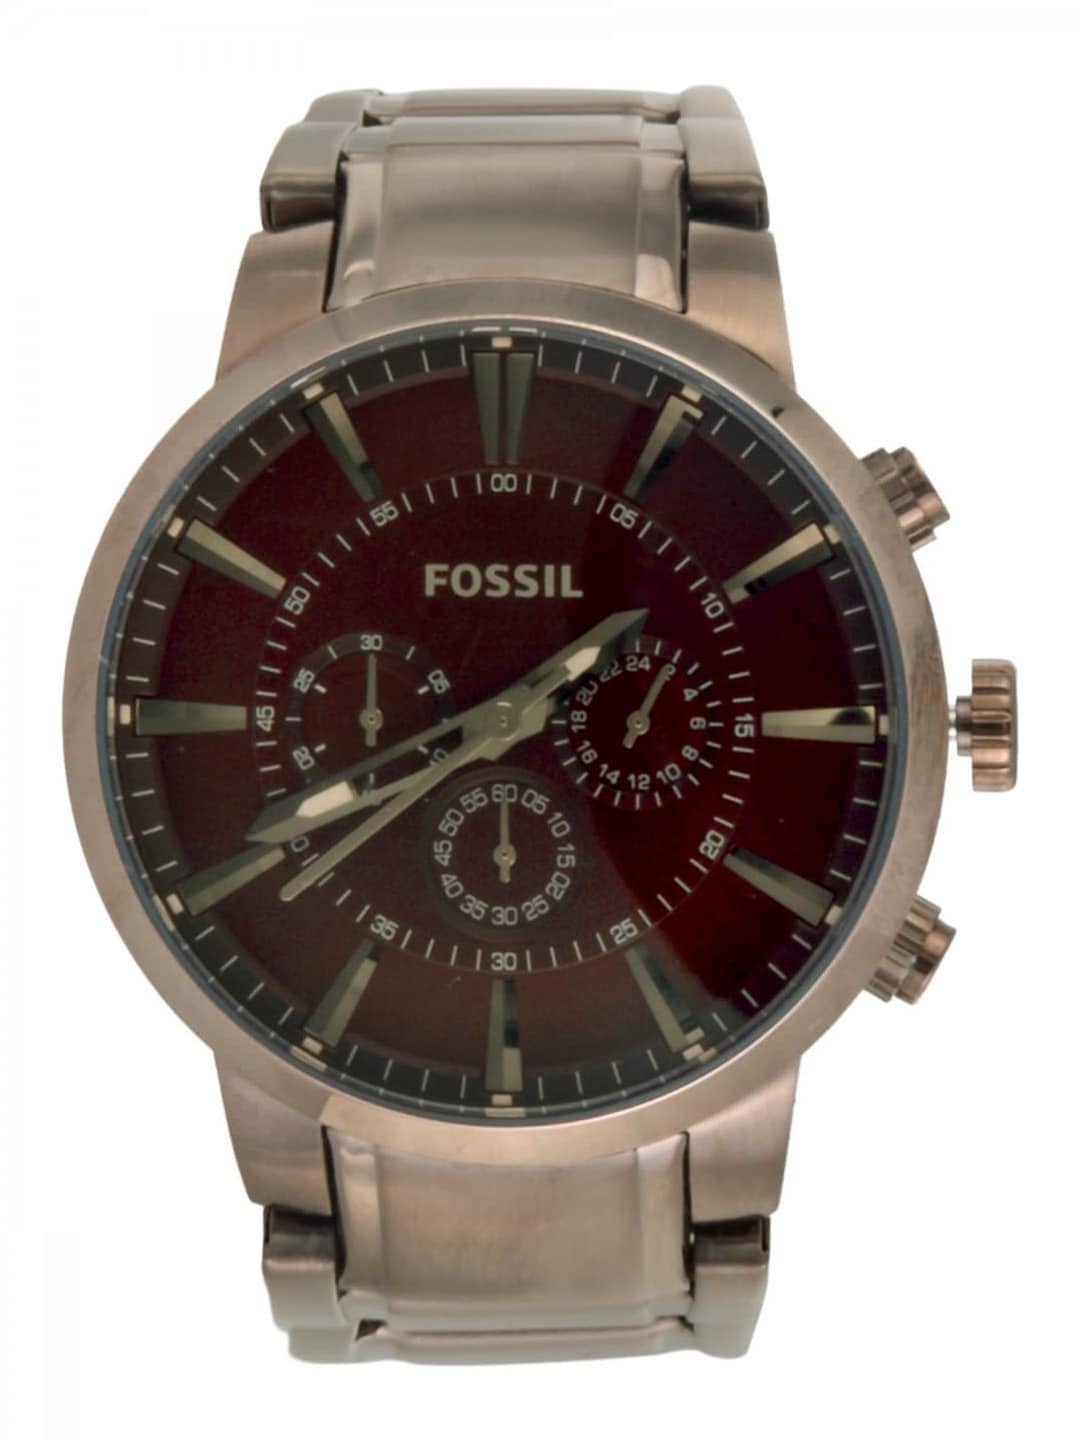 Fossil Men Brown Dial Chronograph Watch FS4357